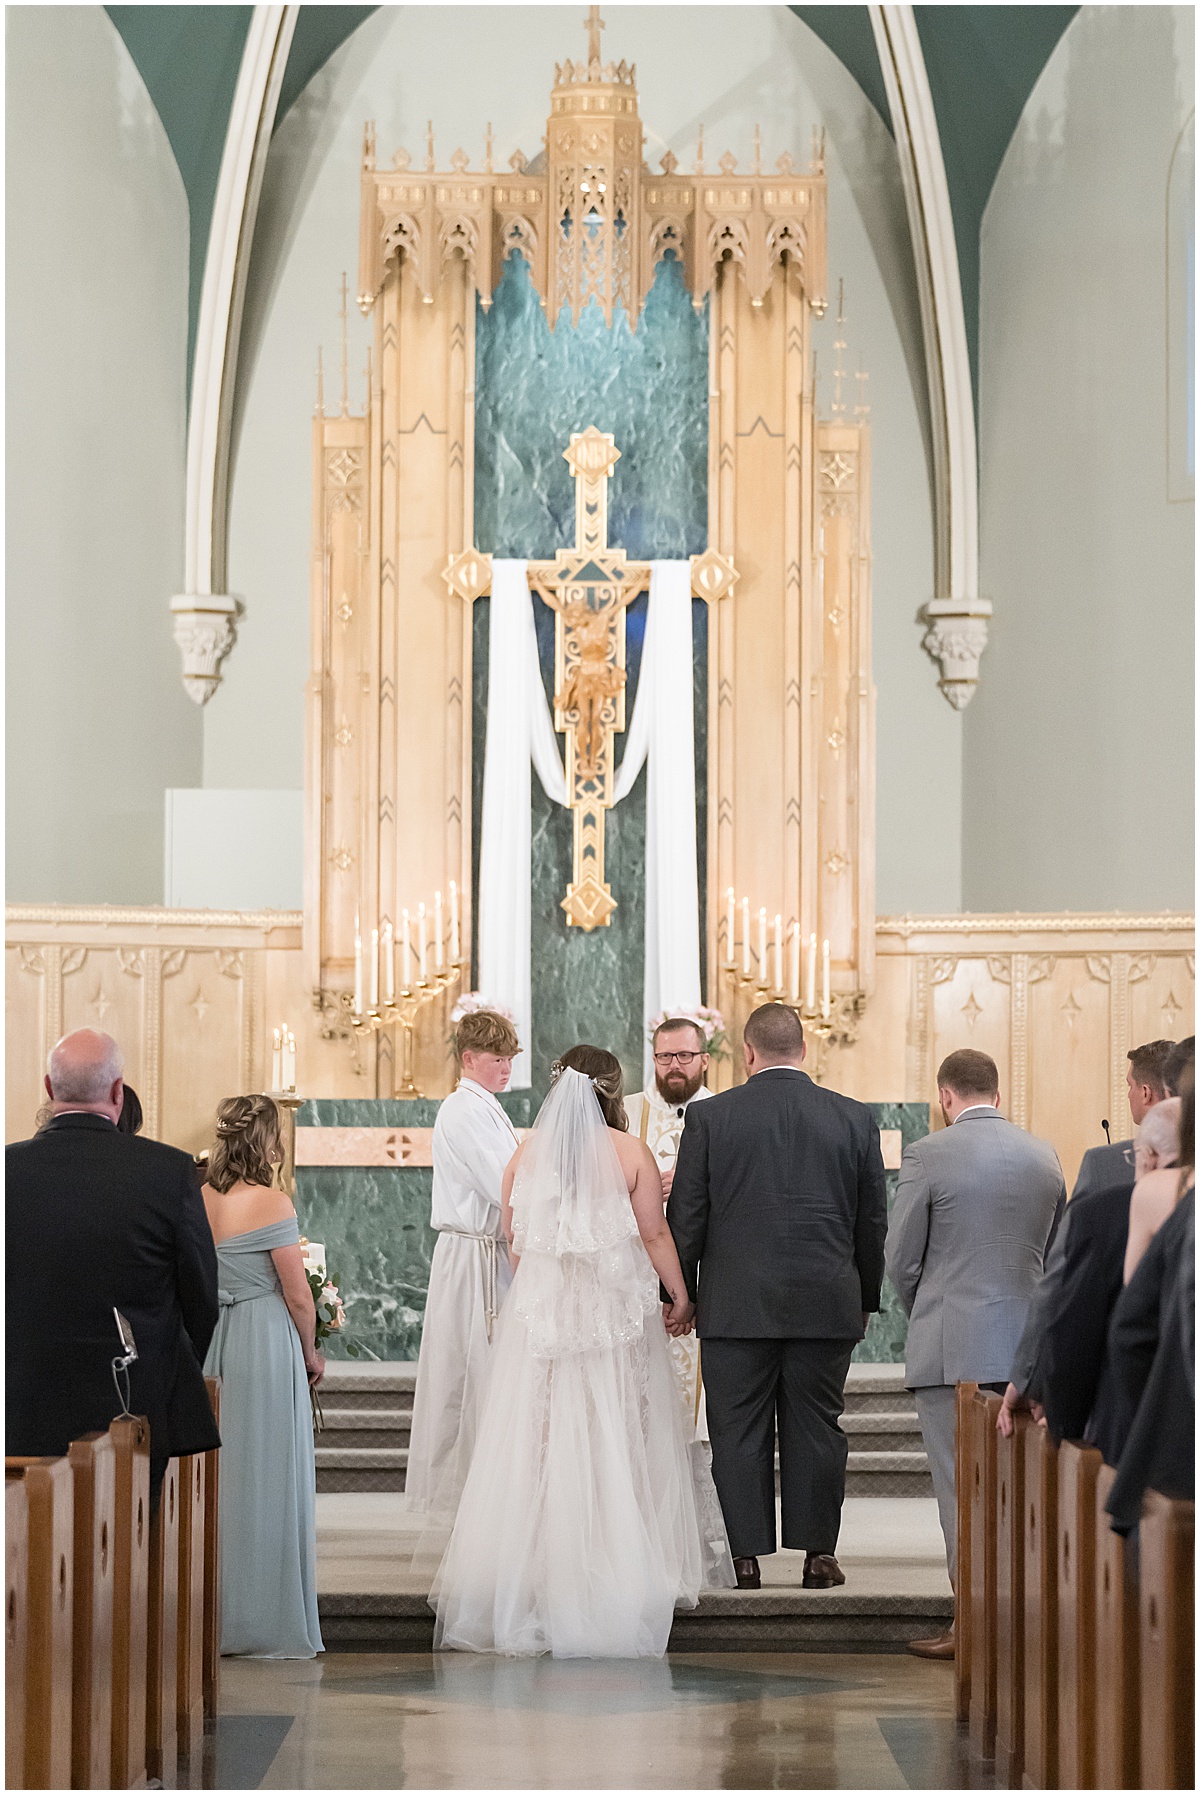 Ceremony of wedding at St. Augustine Catholic Church in Rensselaer, Indiana